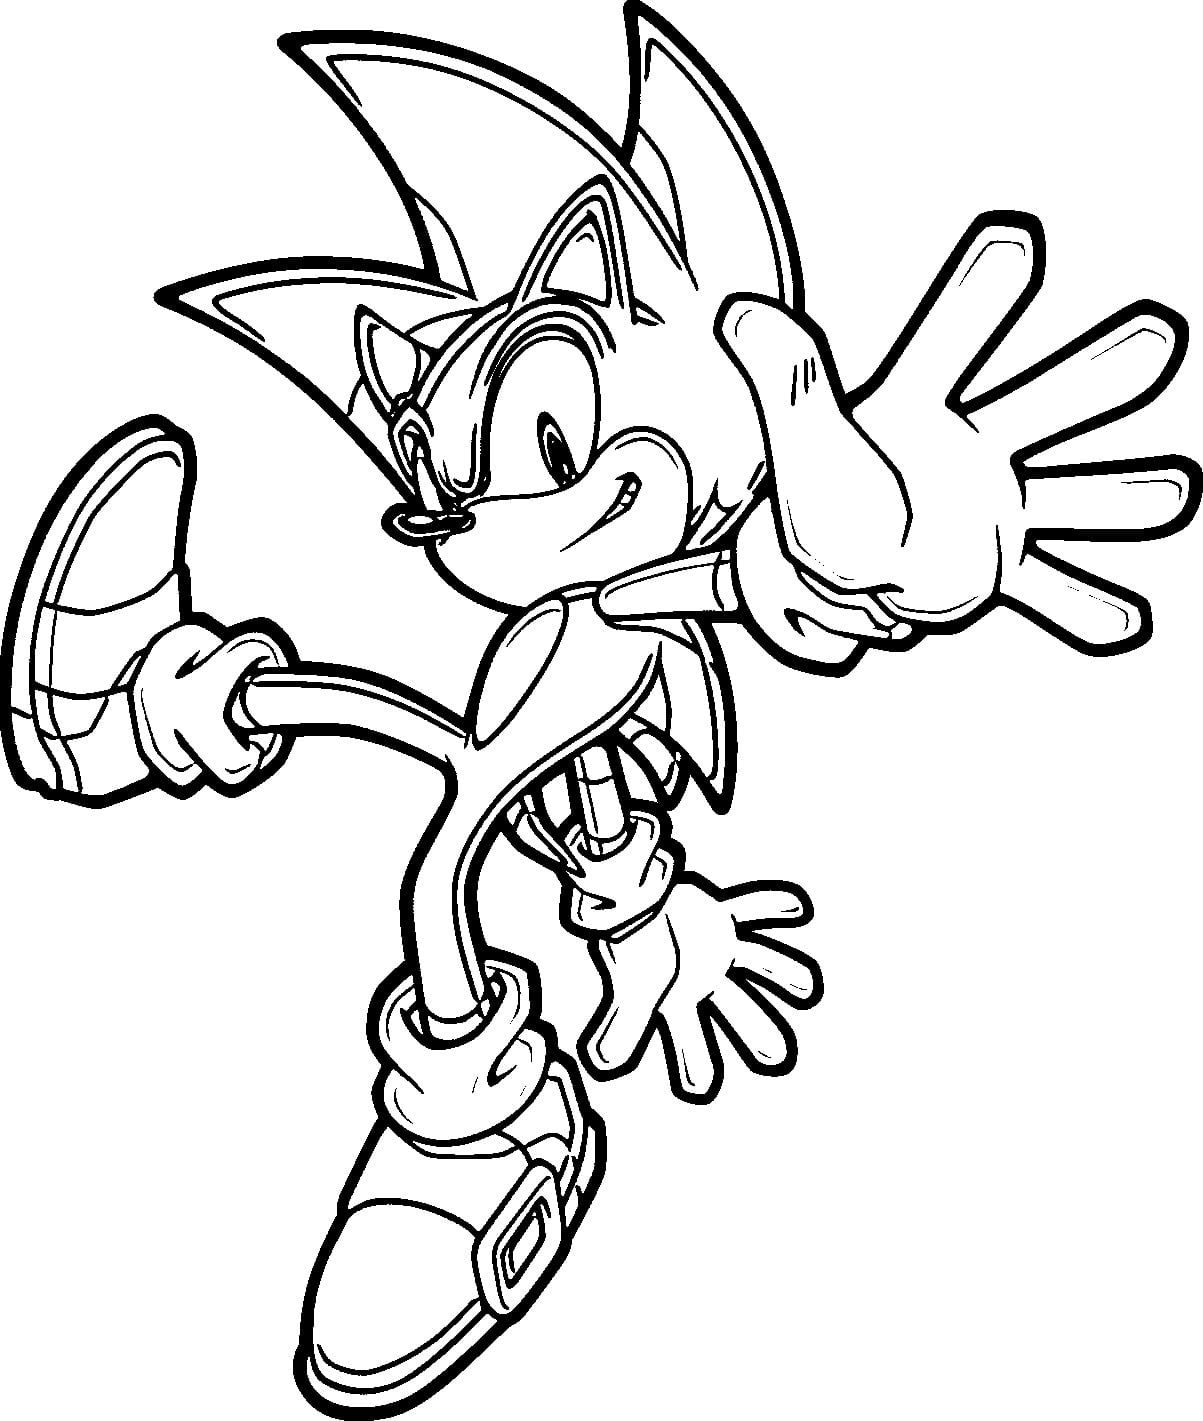 Sonic in motion - Sonic Kids Coloring Pages